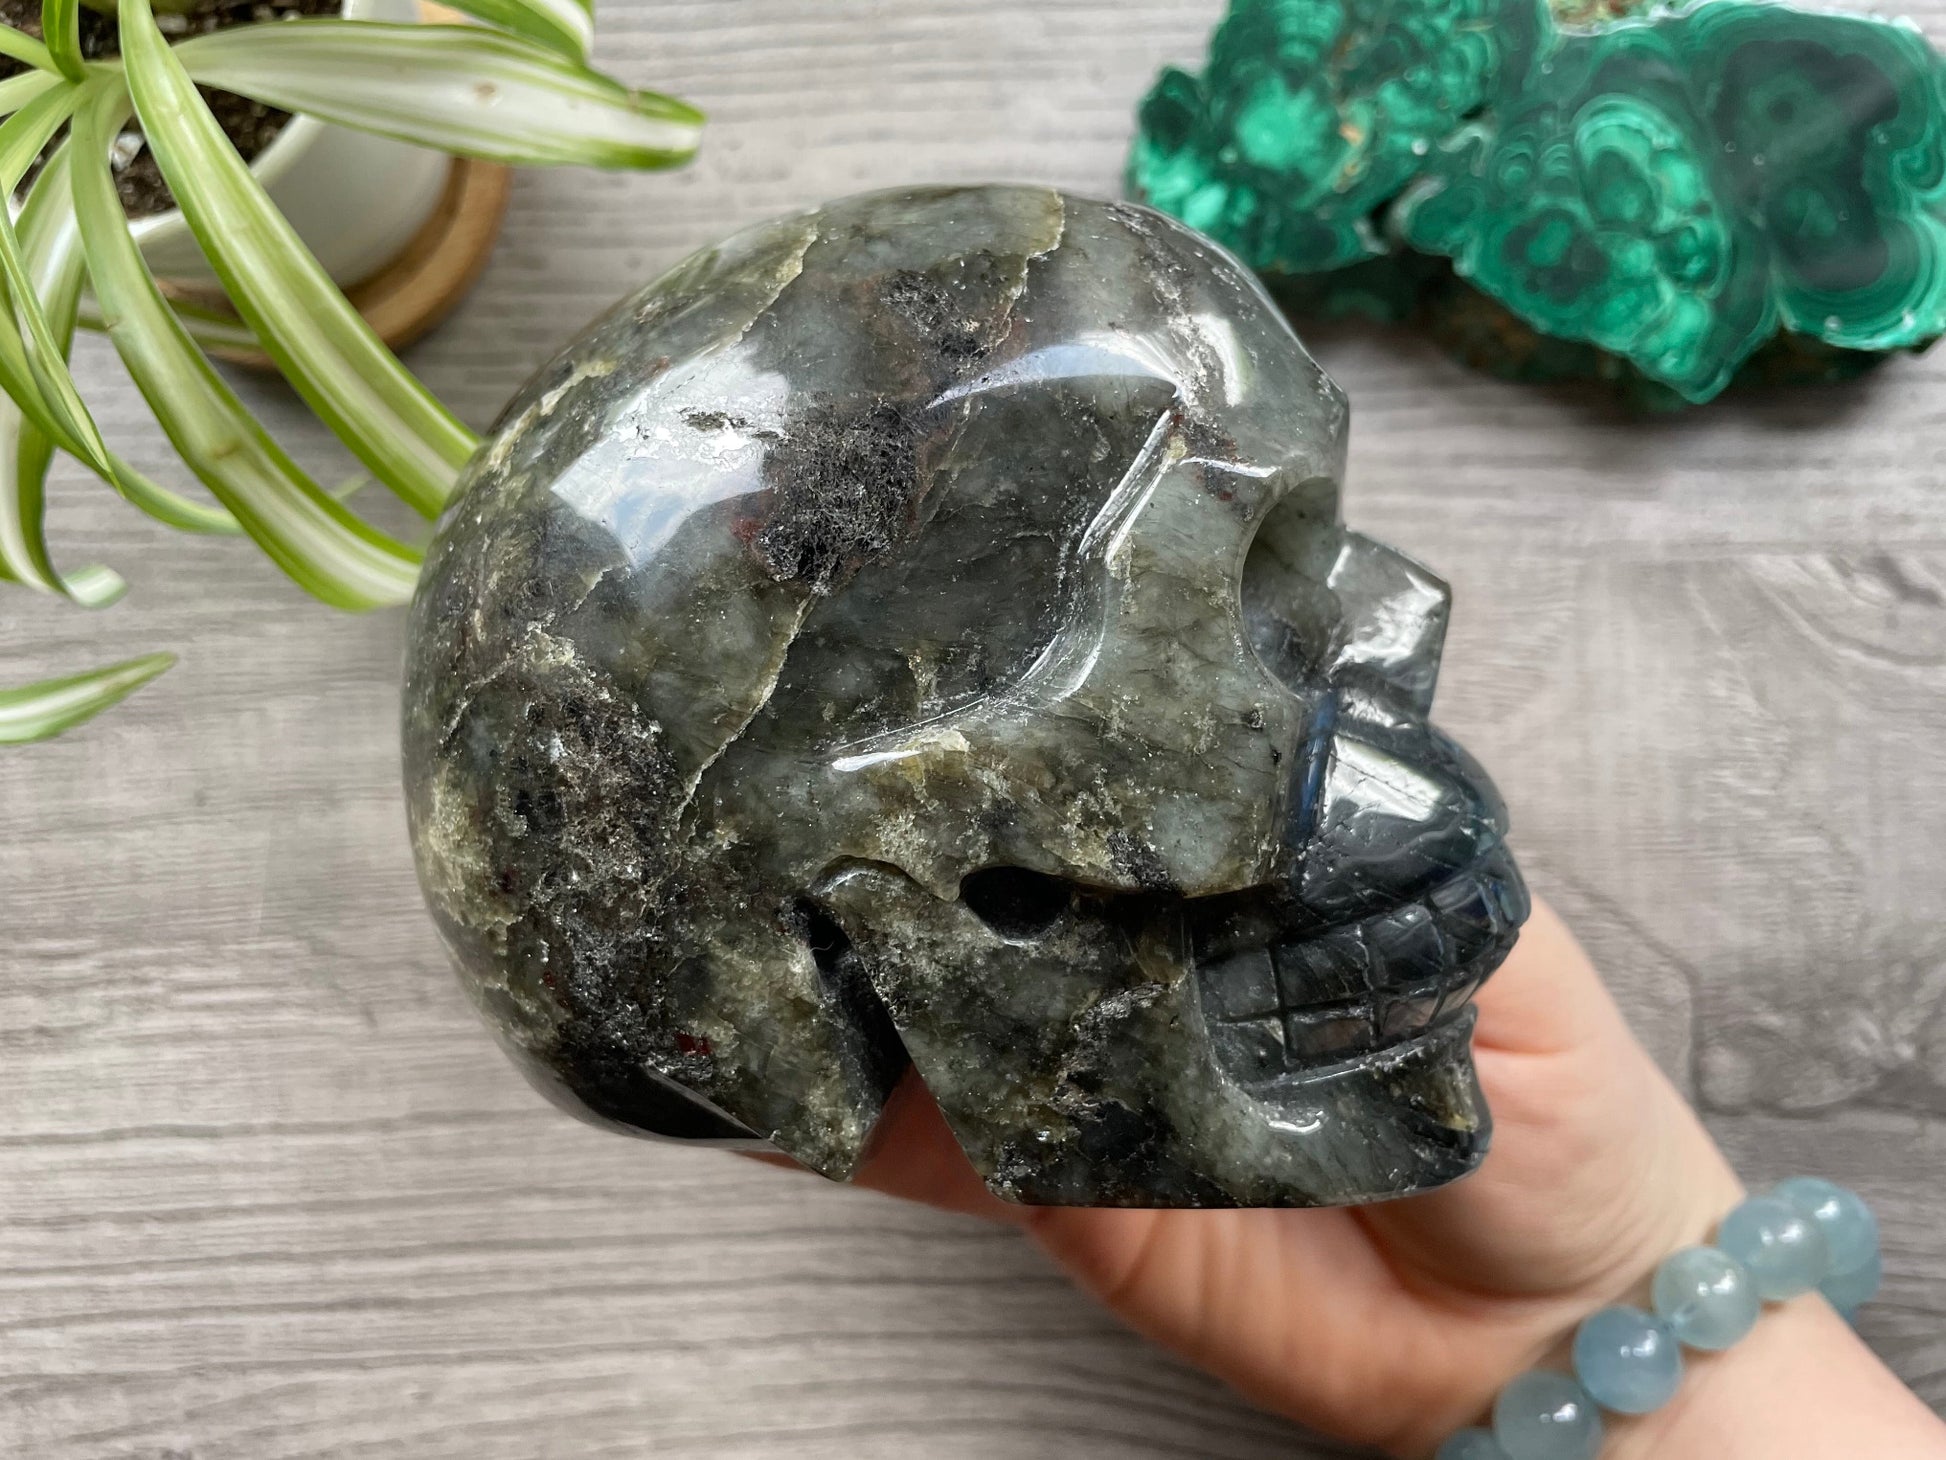 Labradorite Crystal Skull 1.15kg - The Wandering Fox Emporium, Your Metaphysical Store side